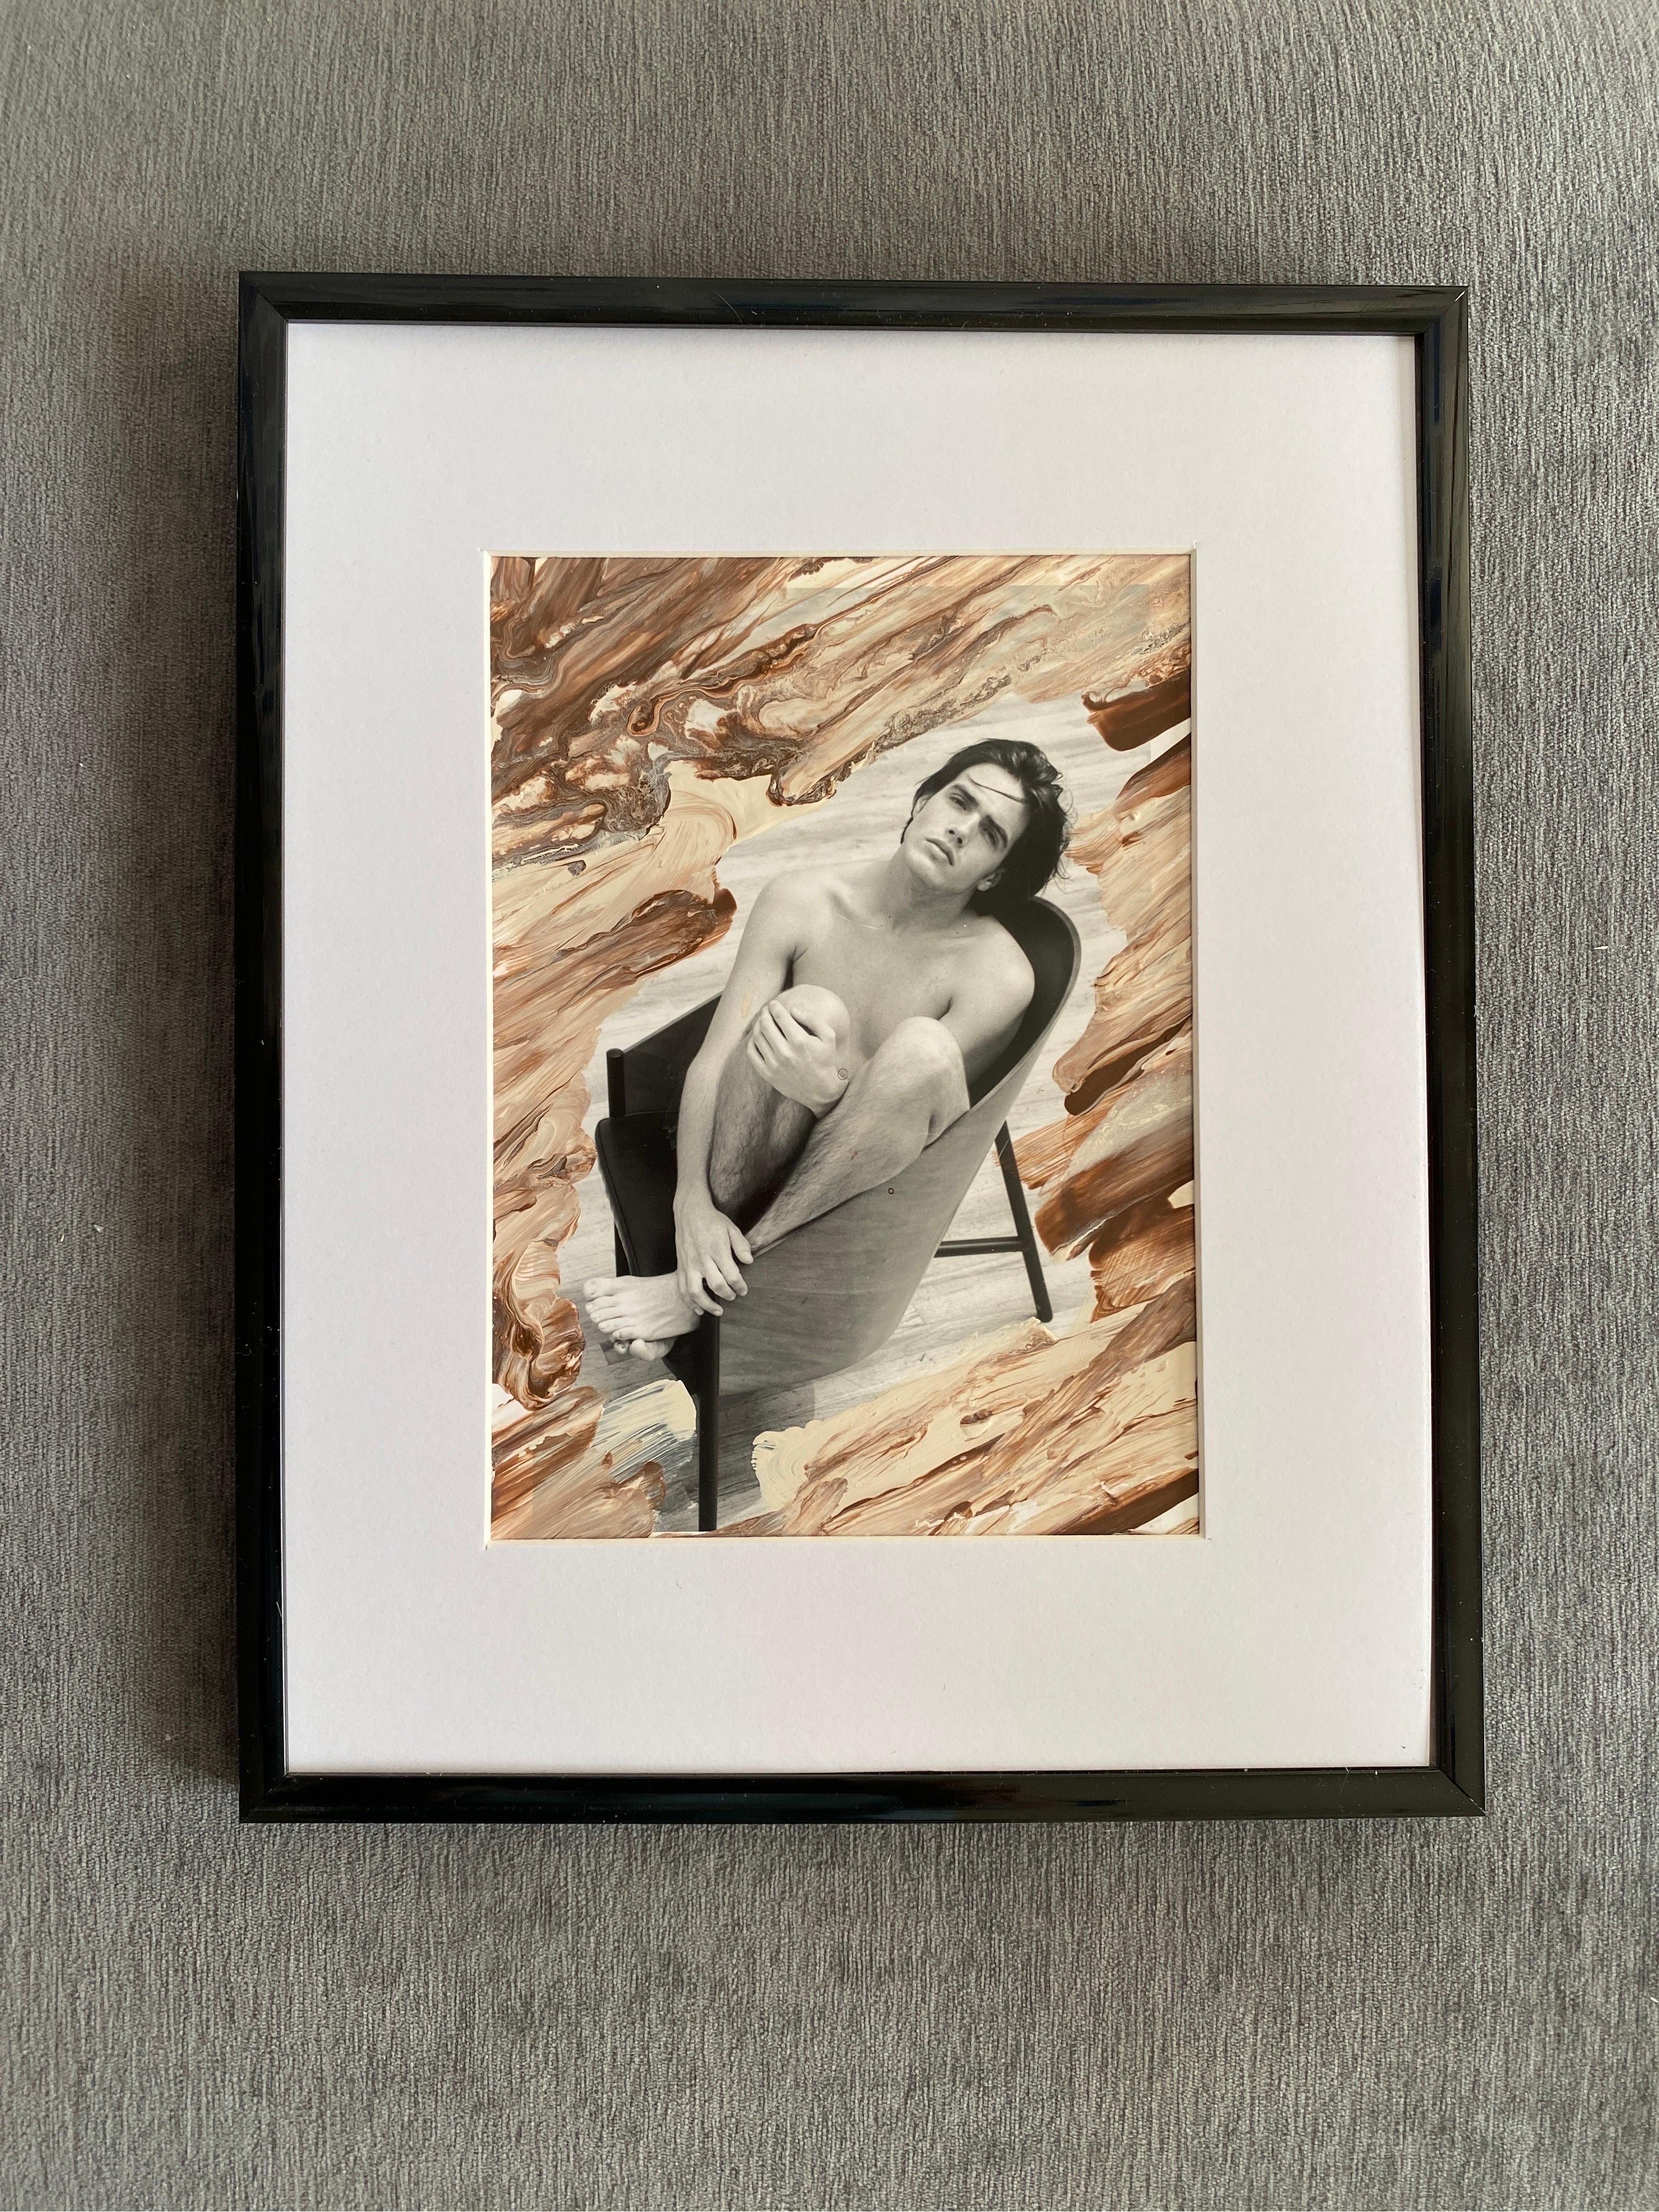 One of a series of original black and white photographs being offered for sale for the first time. Taken by fashion photographer George Machado from his book “Masculine” by Crown Publishers, NYC. These photographs have hand painted embellishments by